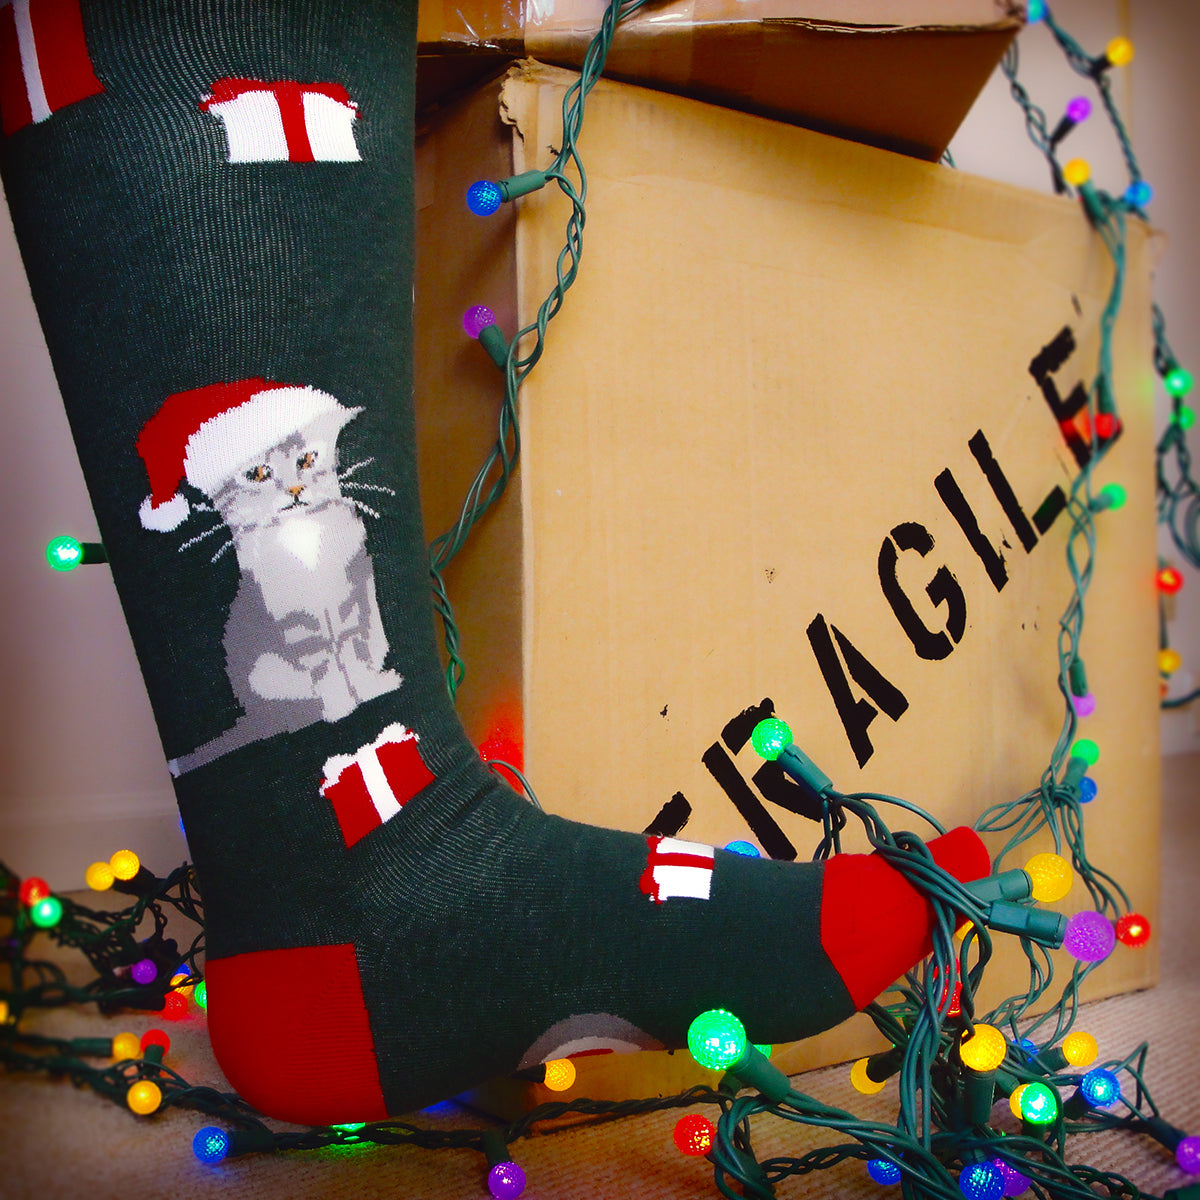 Christmas socks like our red & green knee high socks with Santa cat are what everyone wants for Christmas.